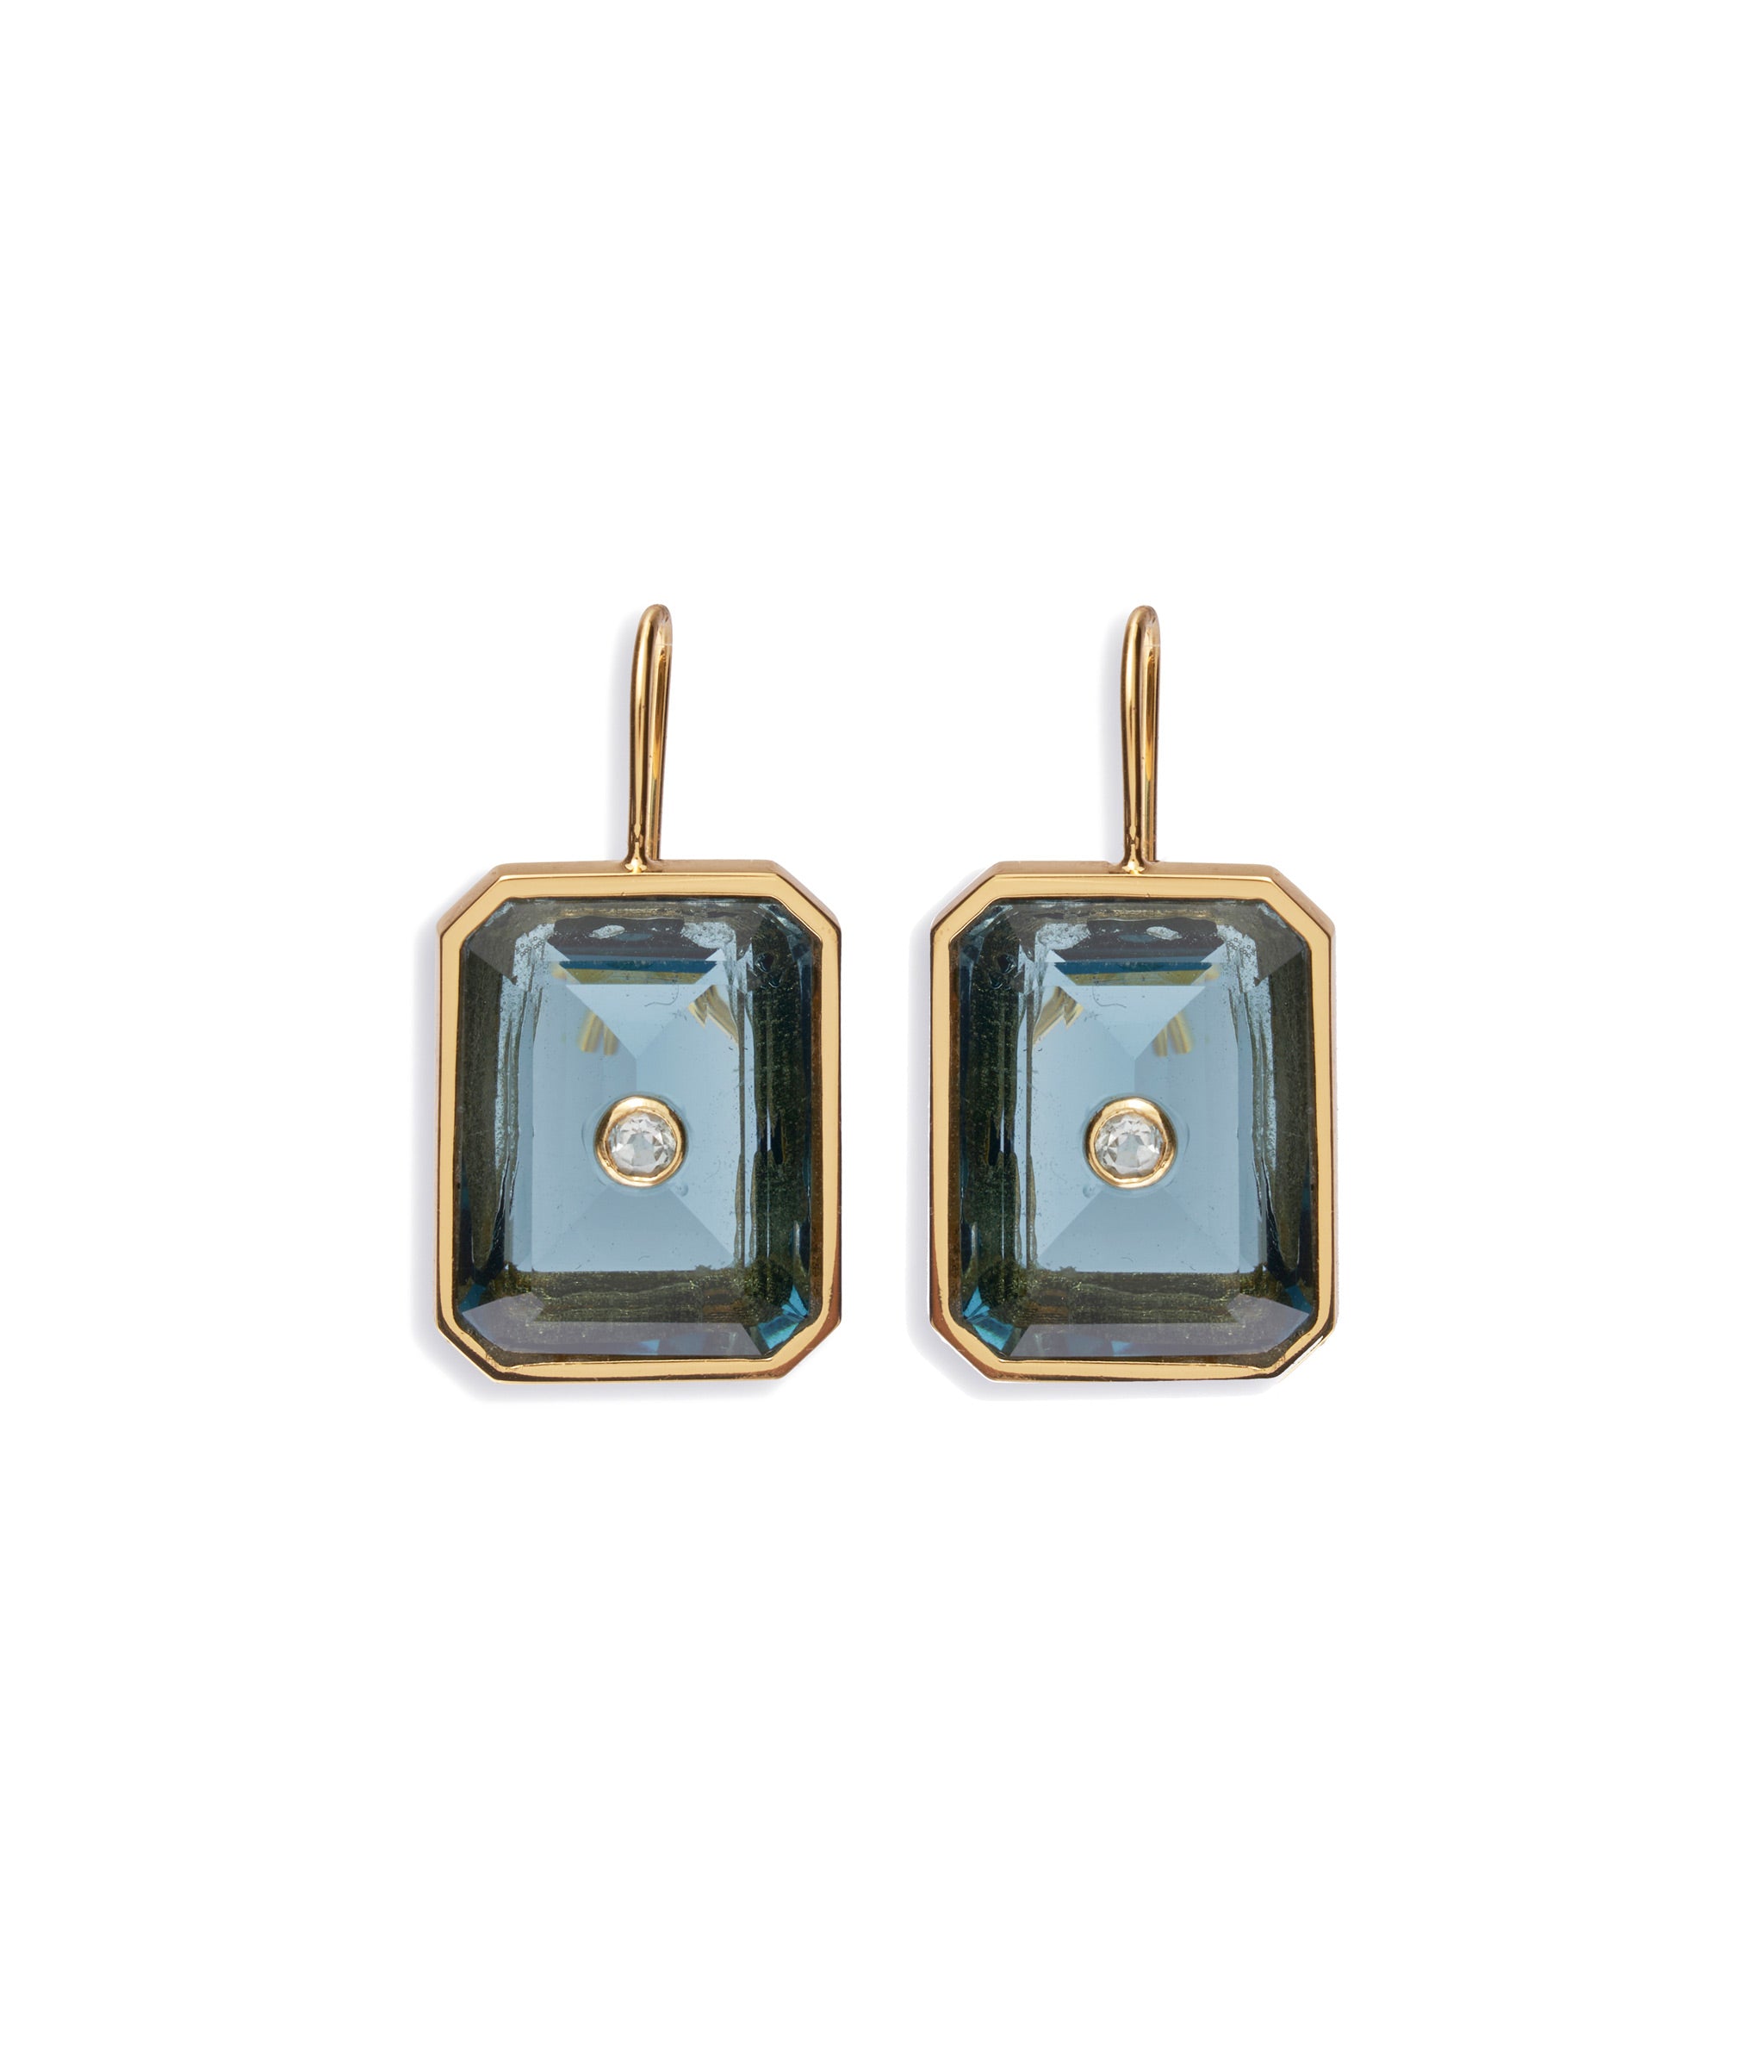 Tile Earrings in Denim. Gold-plated earwires with faceted blue glass inlaid with blue topaz stones